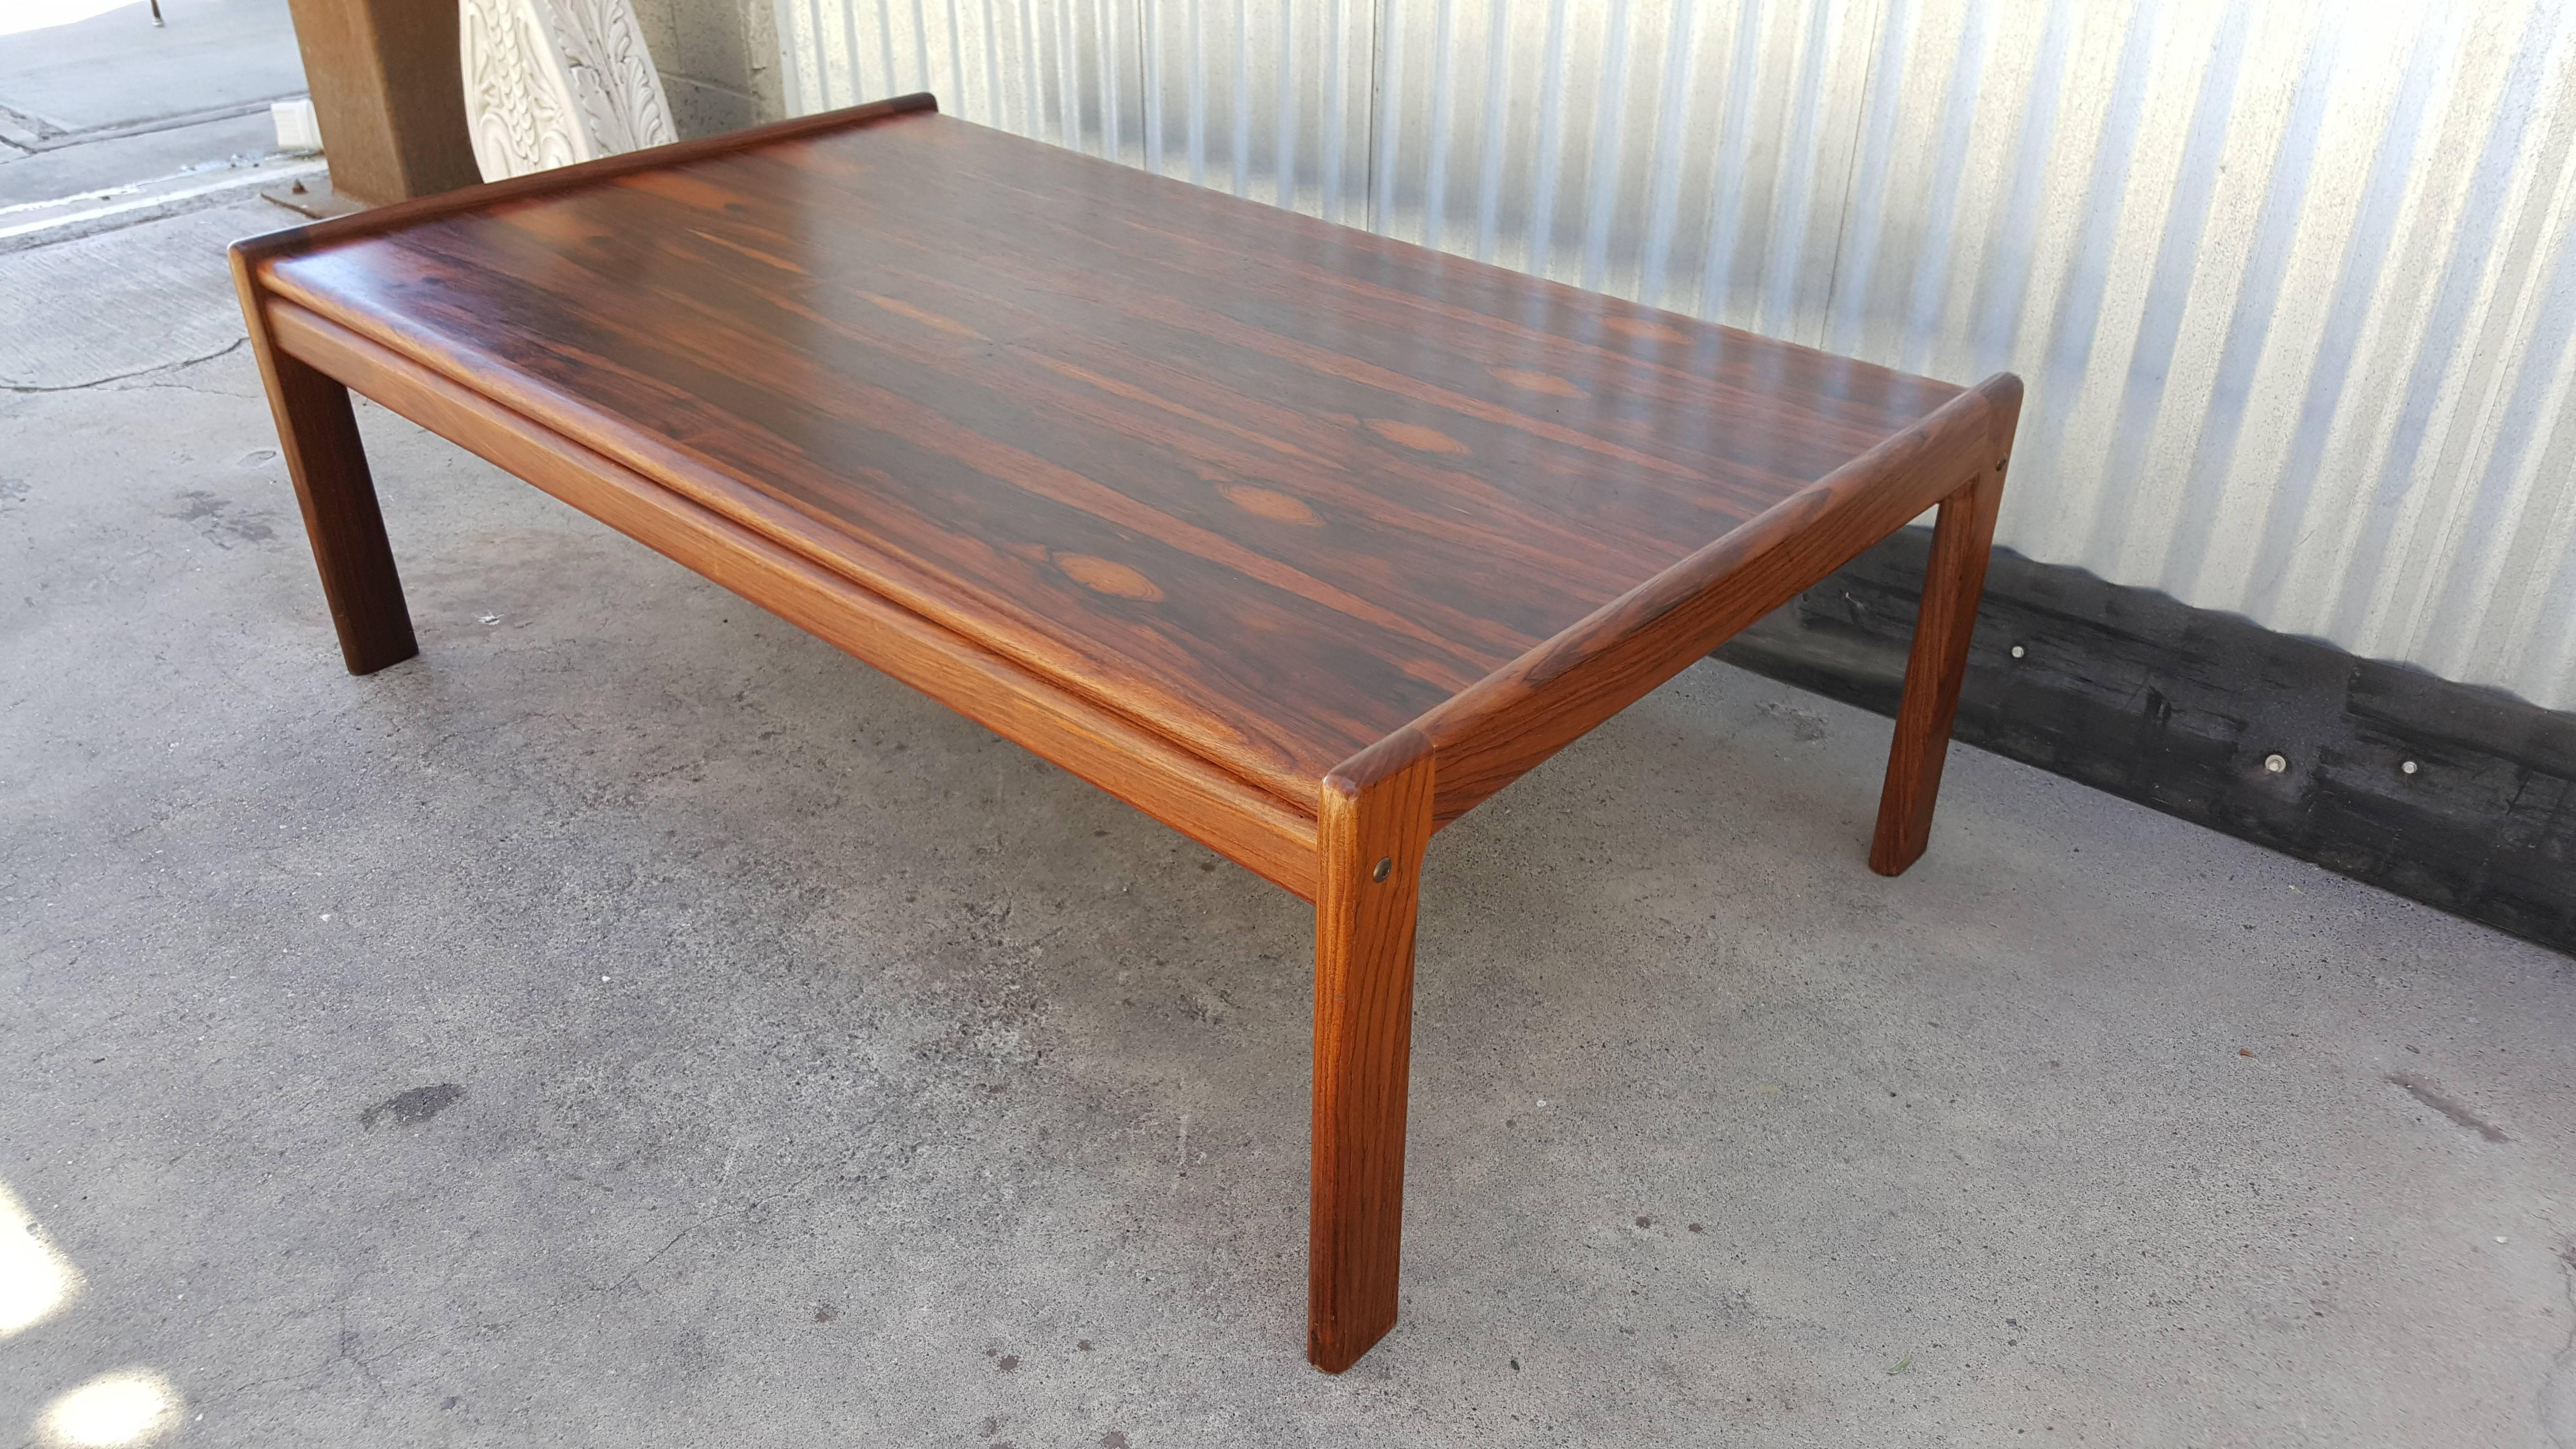 An oversized Danish Modern rosewood coffee table with exceptional figured wood grain, circa 1970.